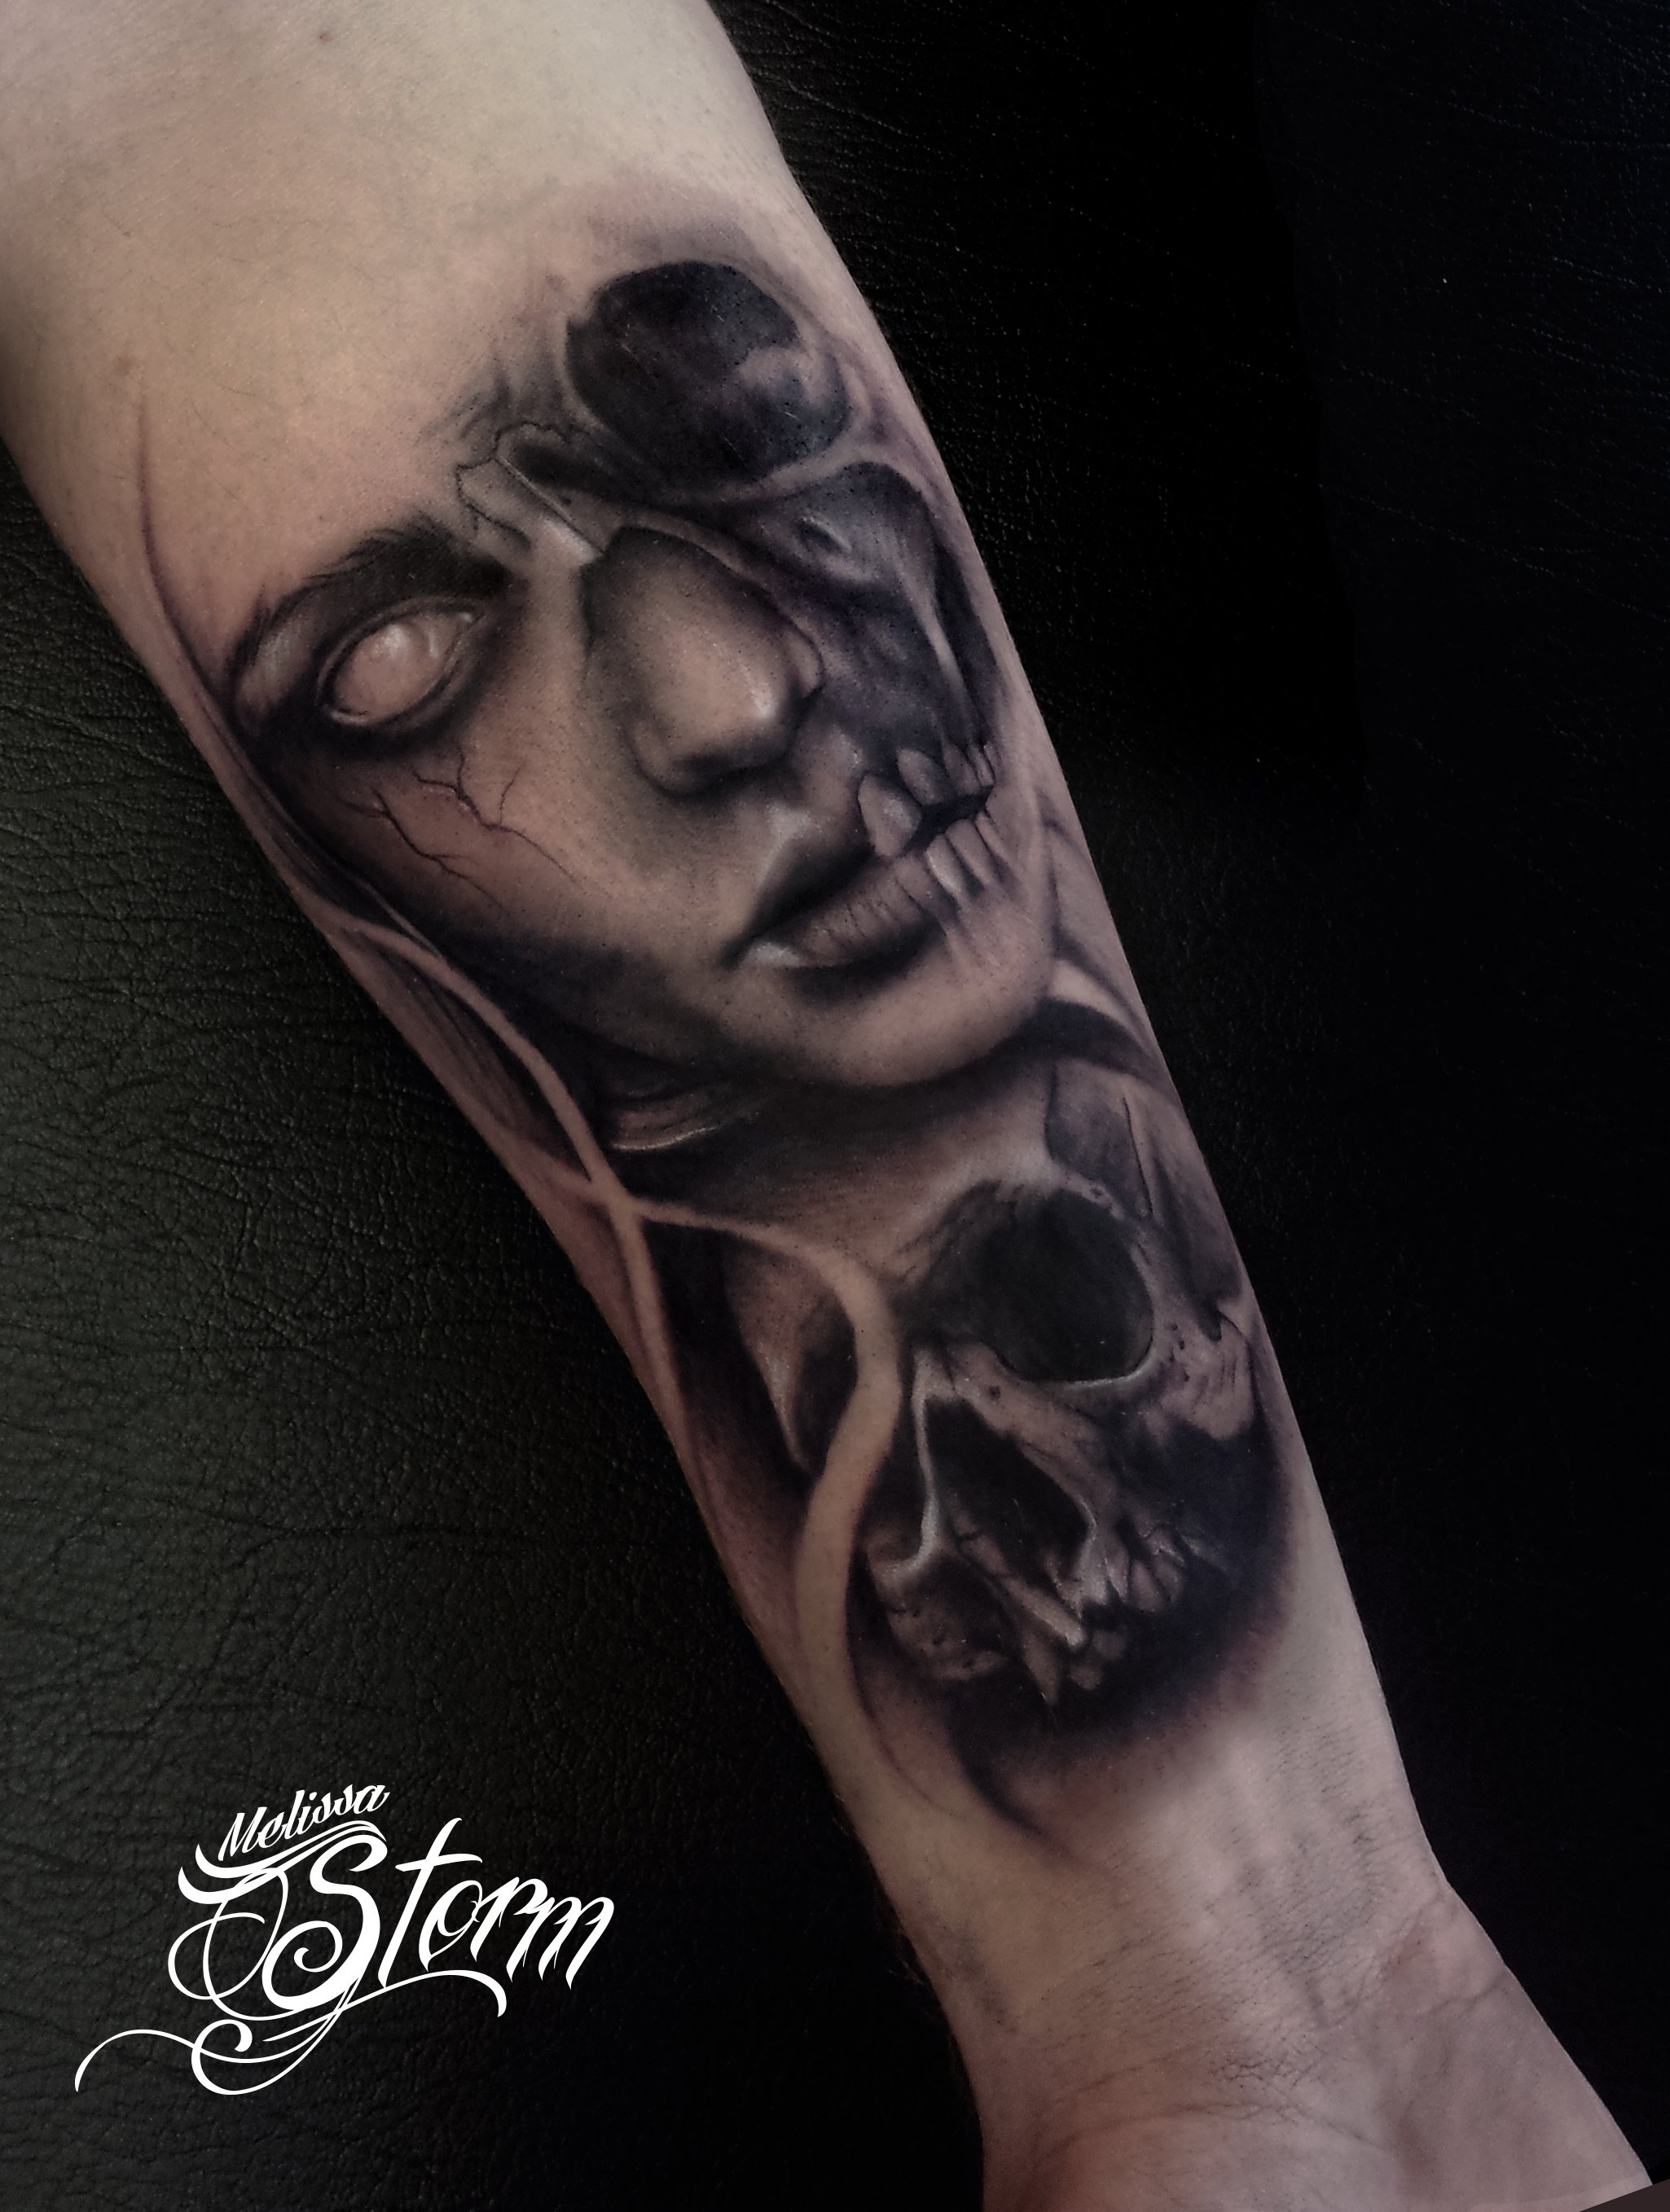 10 Most Recommended Black And Grey Tattoo Ideas black and grey tattoos ideas 2022